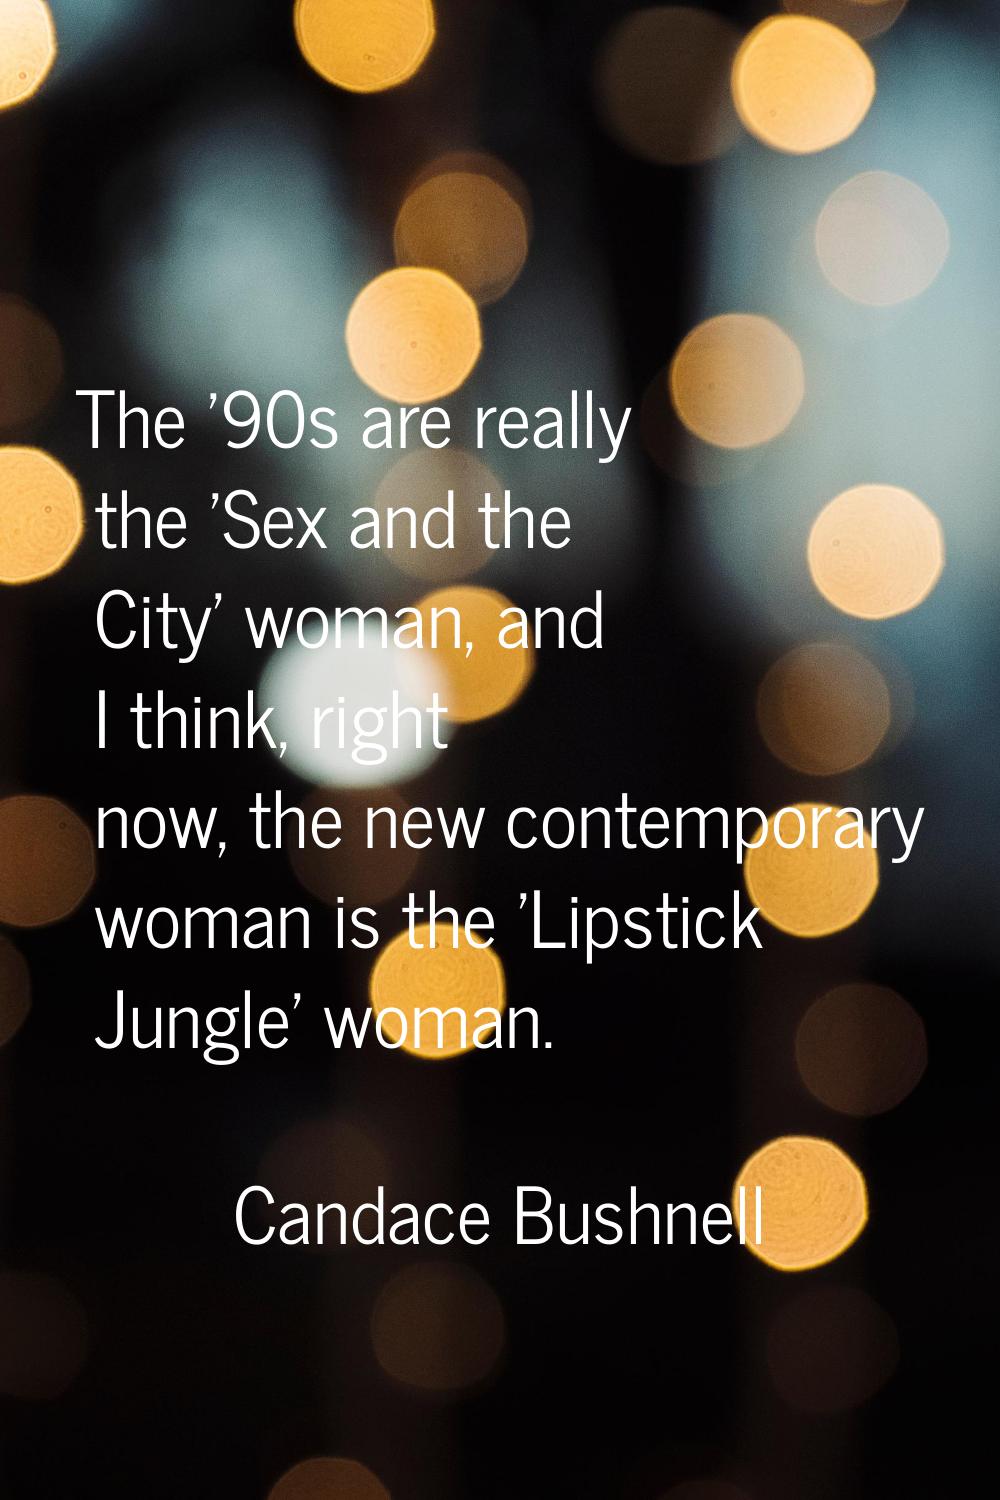 The '90s are really the 'Sex and the City' woman, and I think, right now, the new contemporary woma